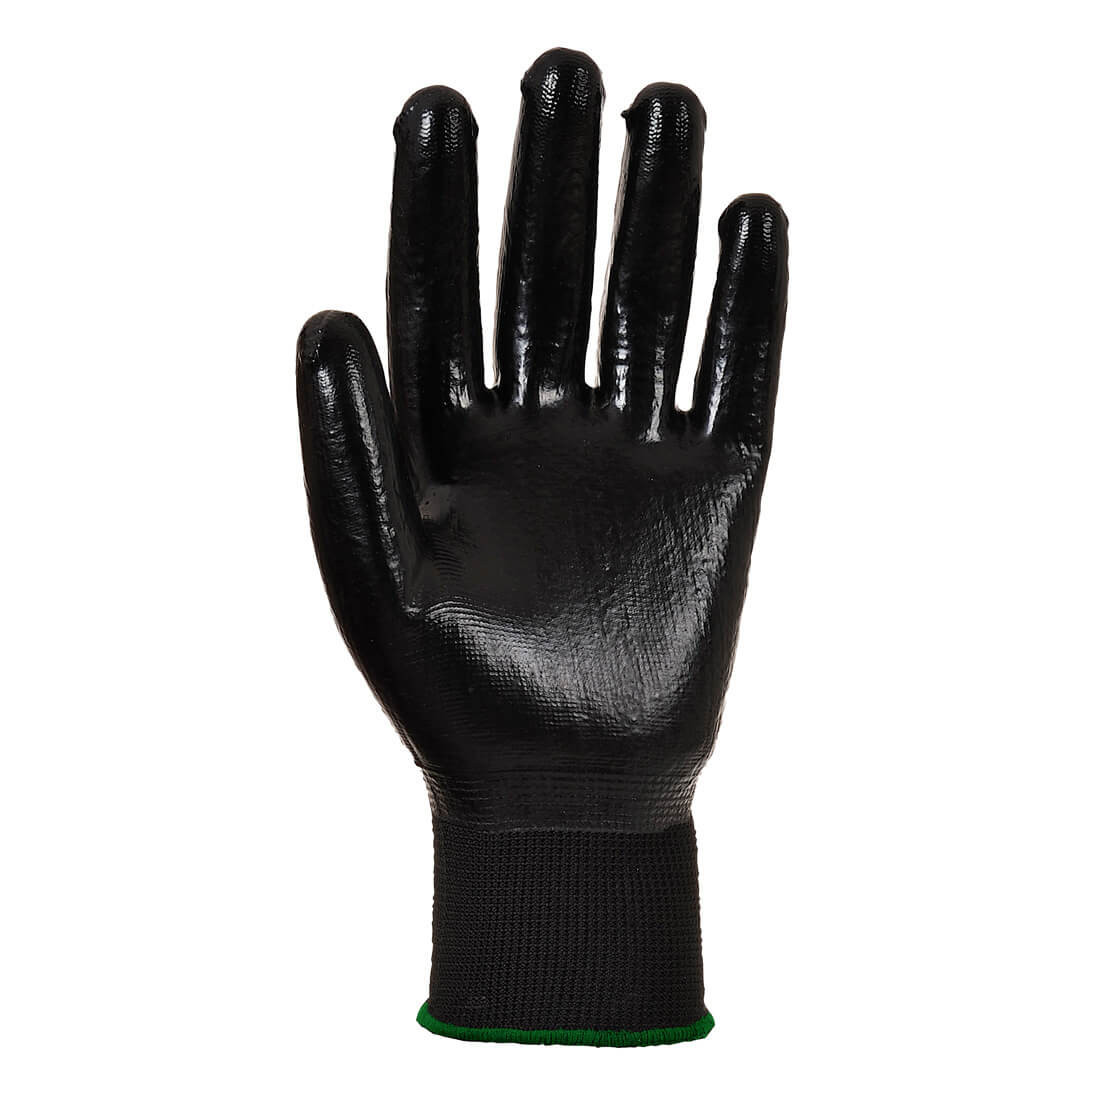 All Flex Grip Glove - Personal protection